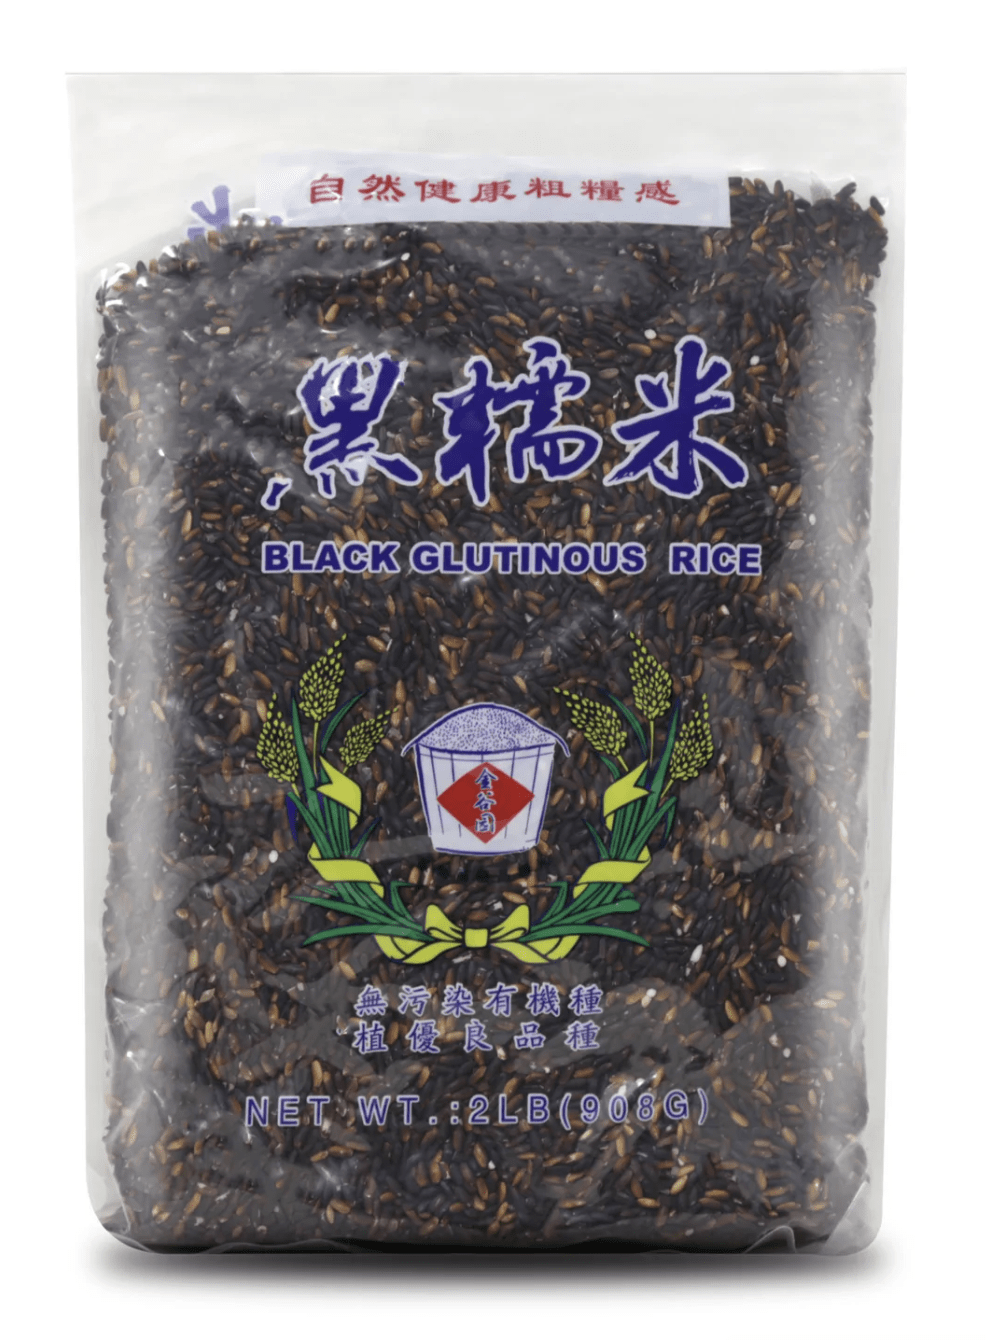 package of black glutinous (sticky) rice 